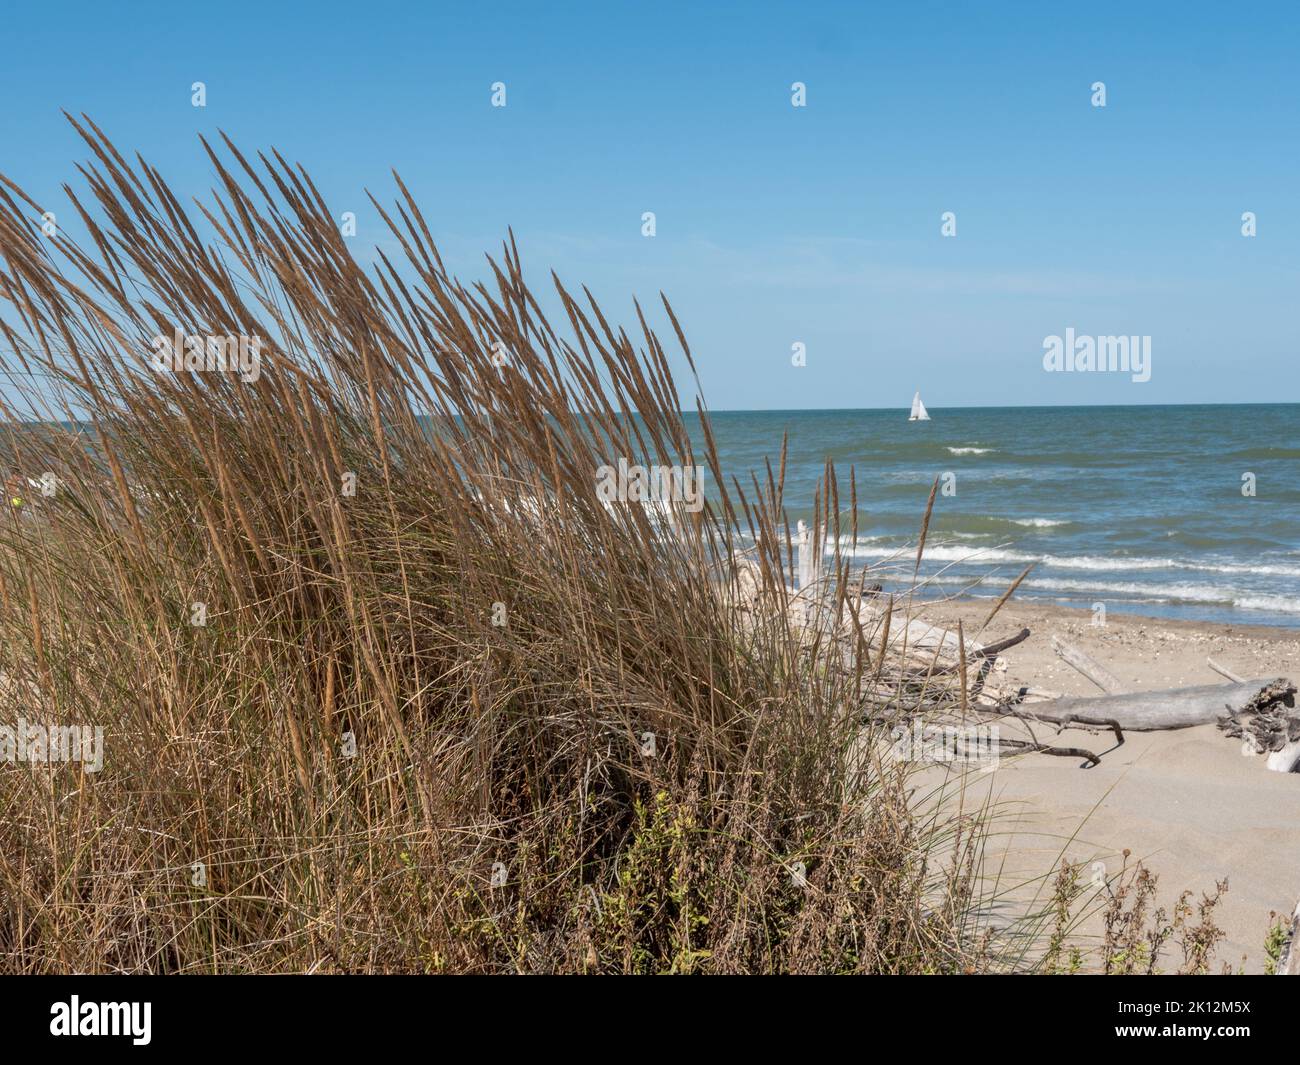 Adriatic sea with dune grass on the natural beach Stock Photo